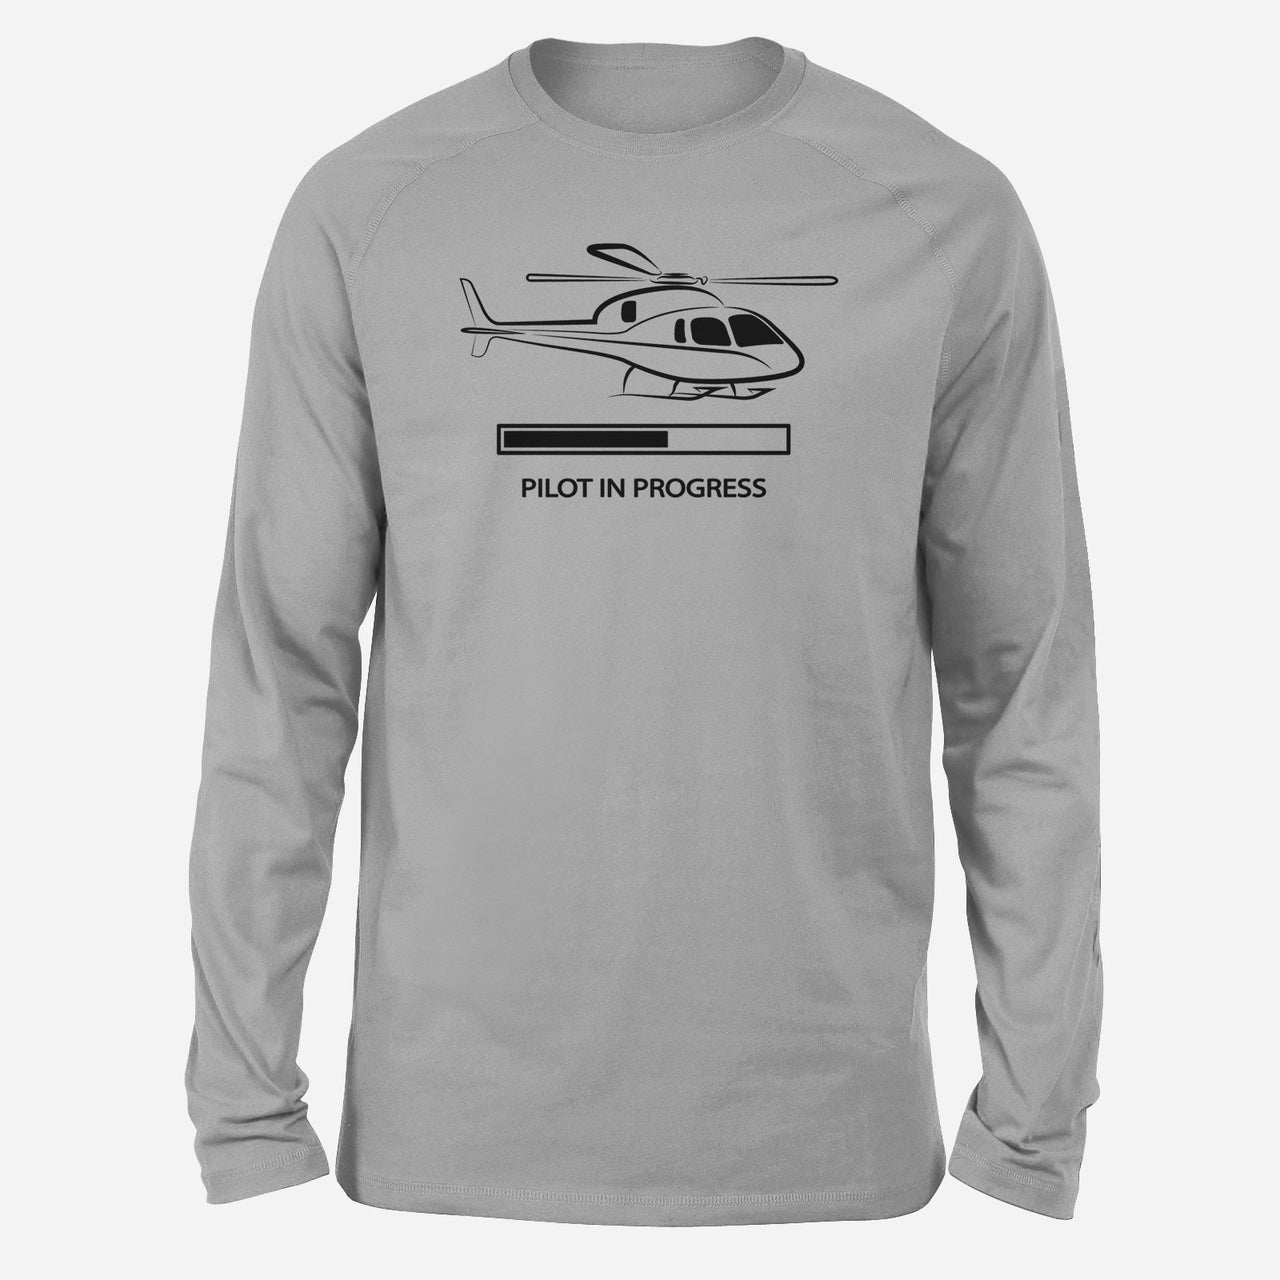 Pilot In Progress (Helicopter) Designed Long-Sleeve T-Shirts